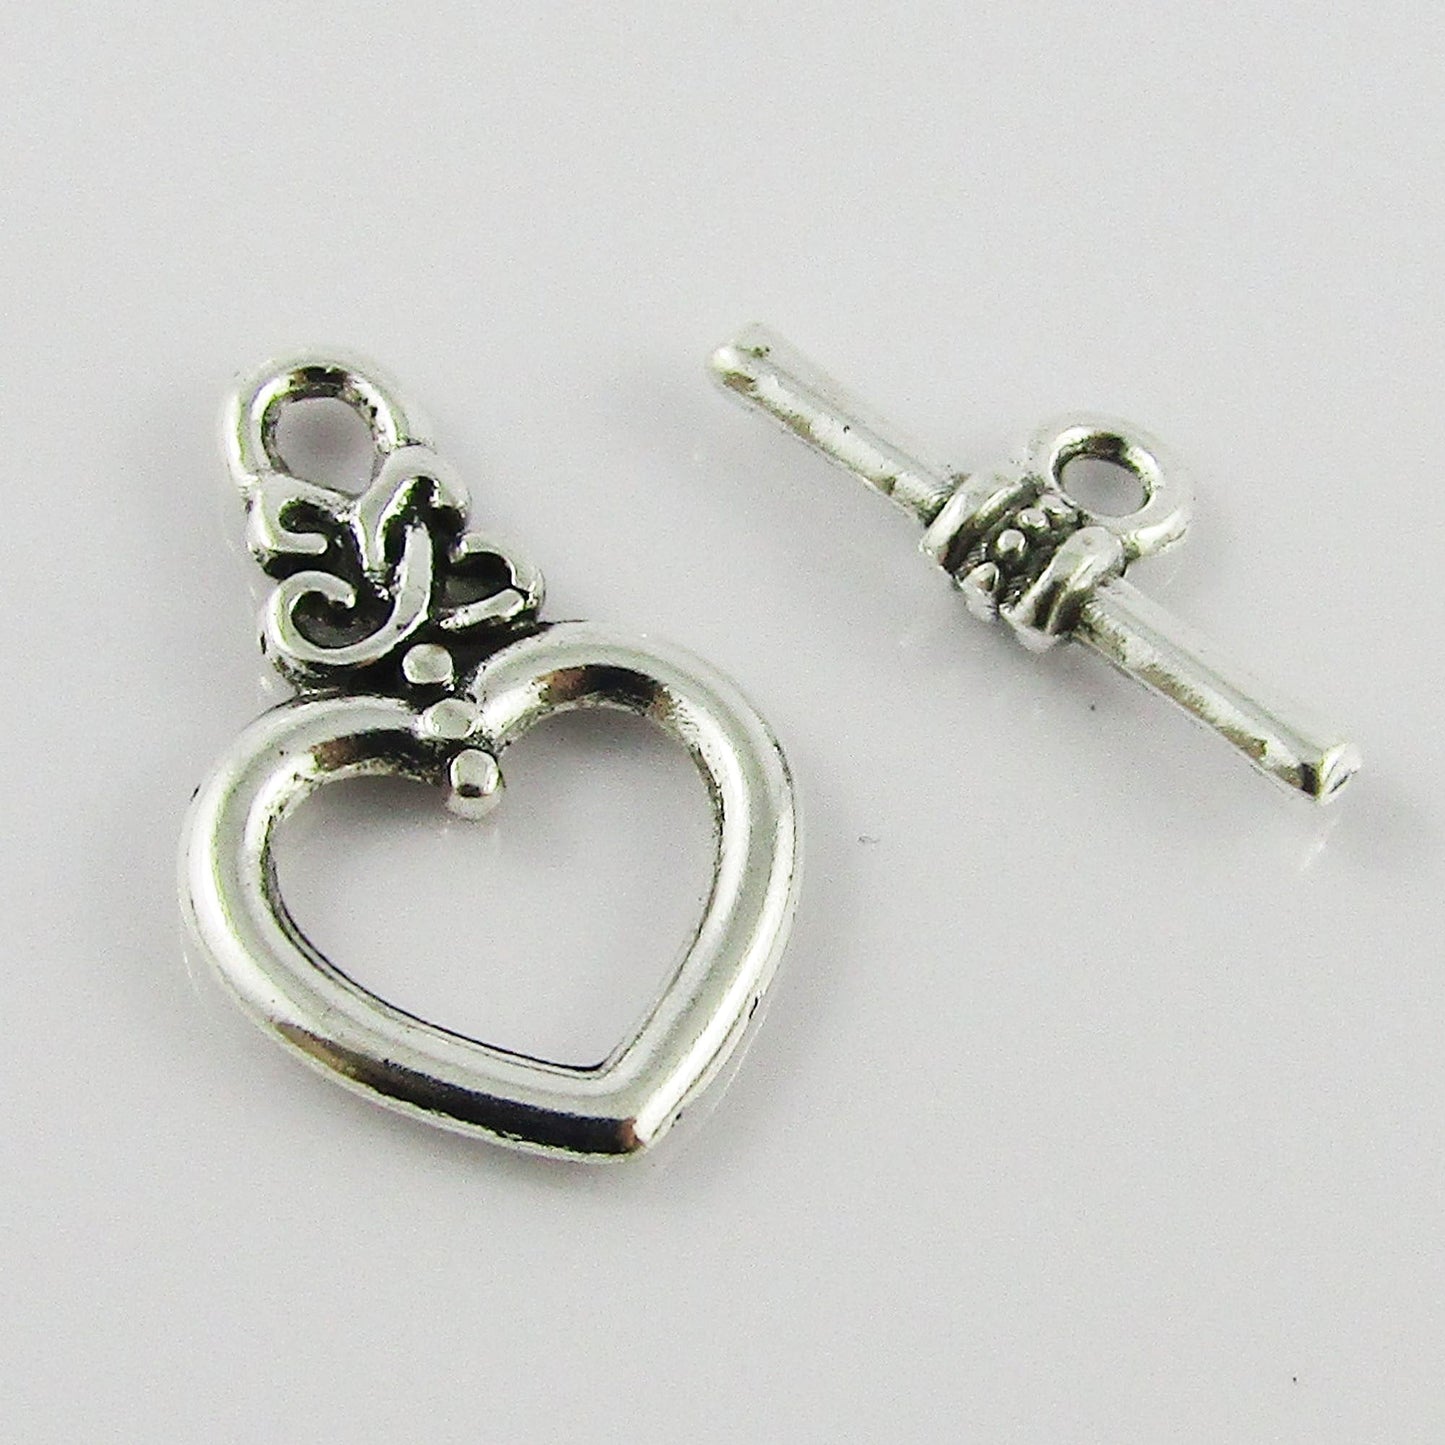 Bulk 10 sets DIY Heart Toggle Clasp Finding Hook & Eye 20x13mm Antique Silver